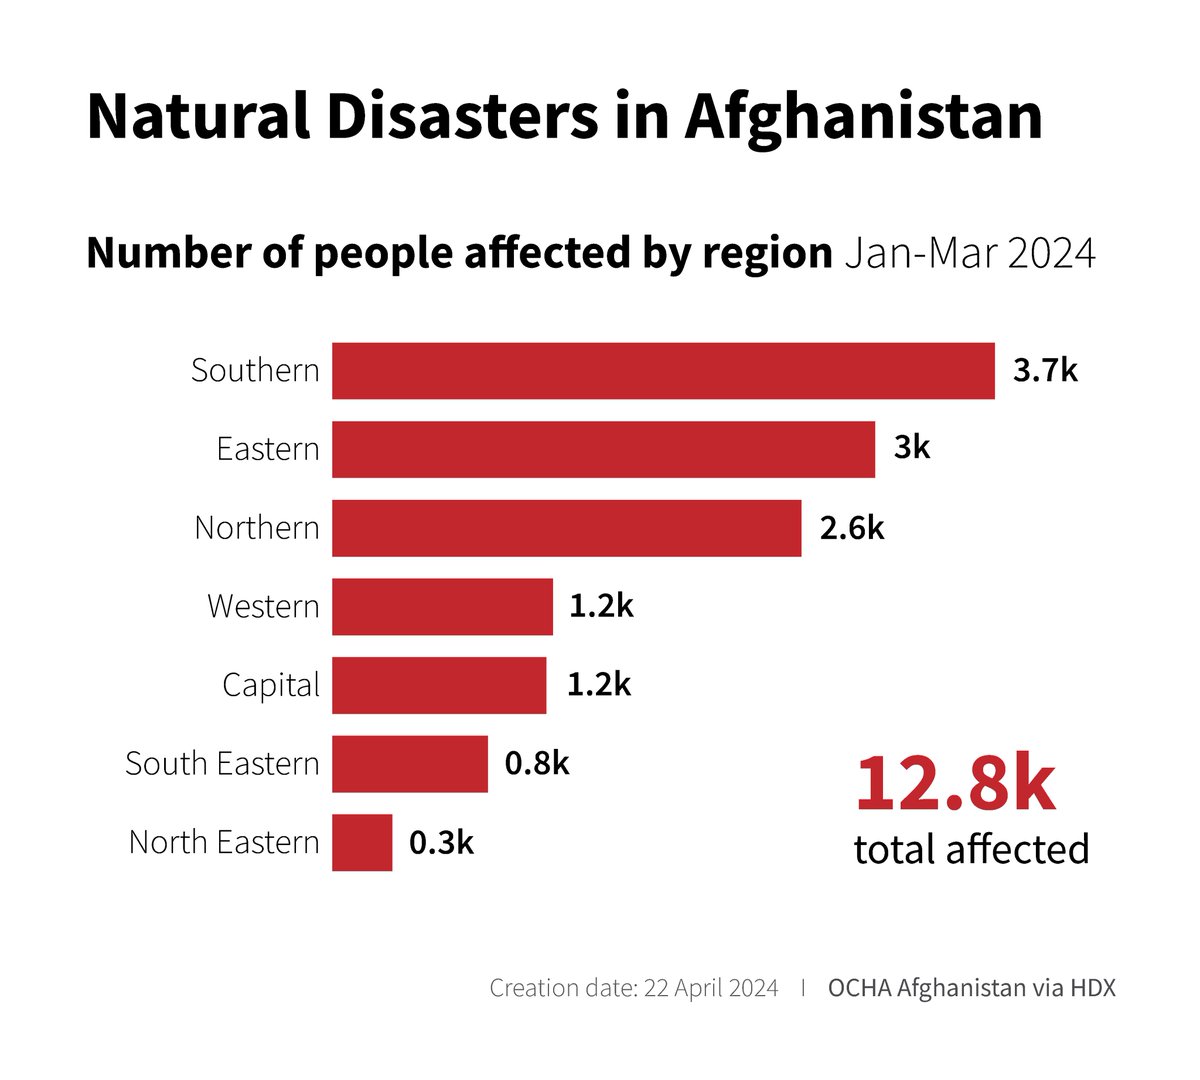 In the first three months of 2024, approximately 50% of people affected by natural disasters in #Afghanistan were in the Southern and Eastern regions of the country, according to data shared by @OCHAAfg. Explore the climate impact data on HDX: data.humdata.org/dataset/afghan…